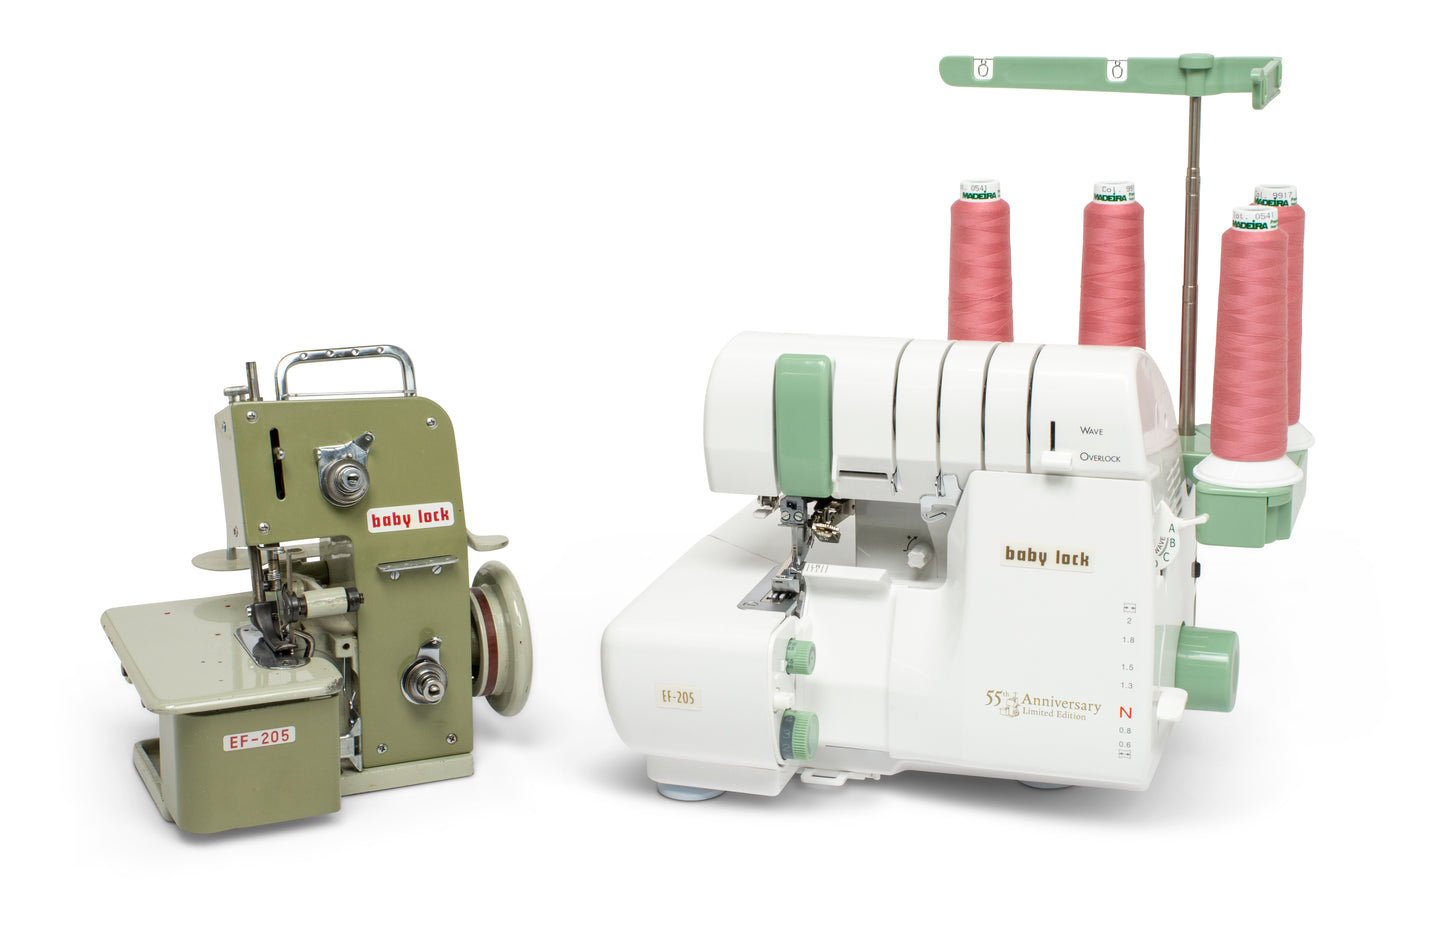 Baby Lock 55th Anniversary Limited Edition Serger & Gift with Purchase